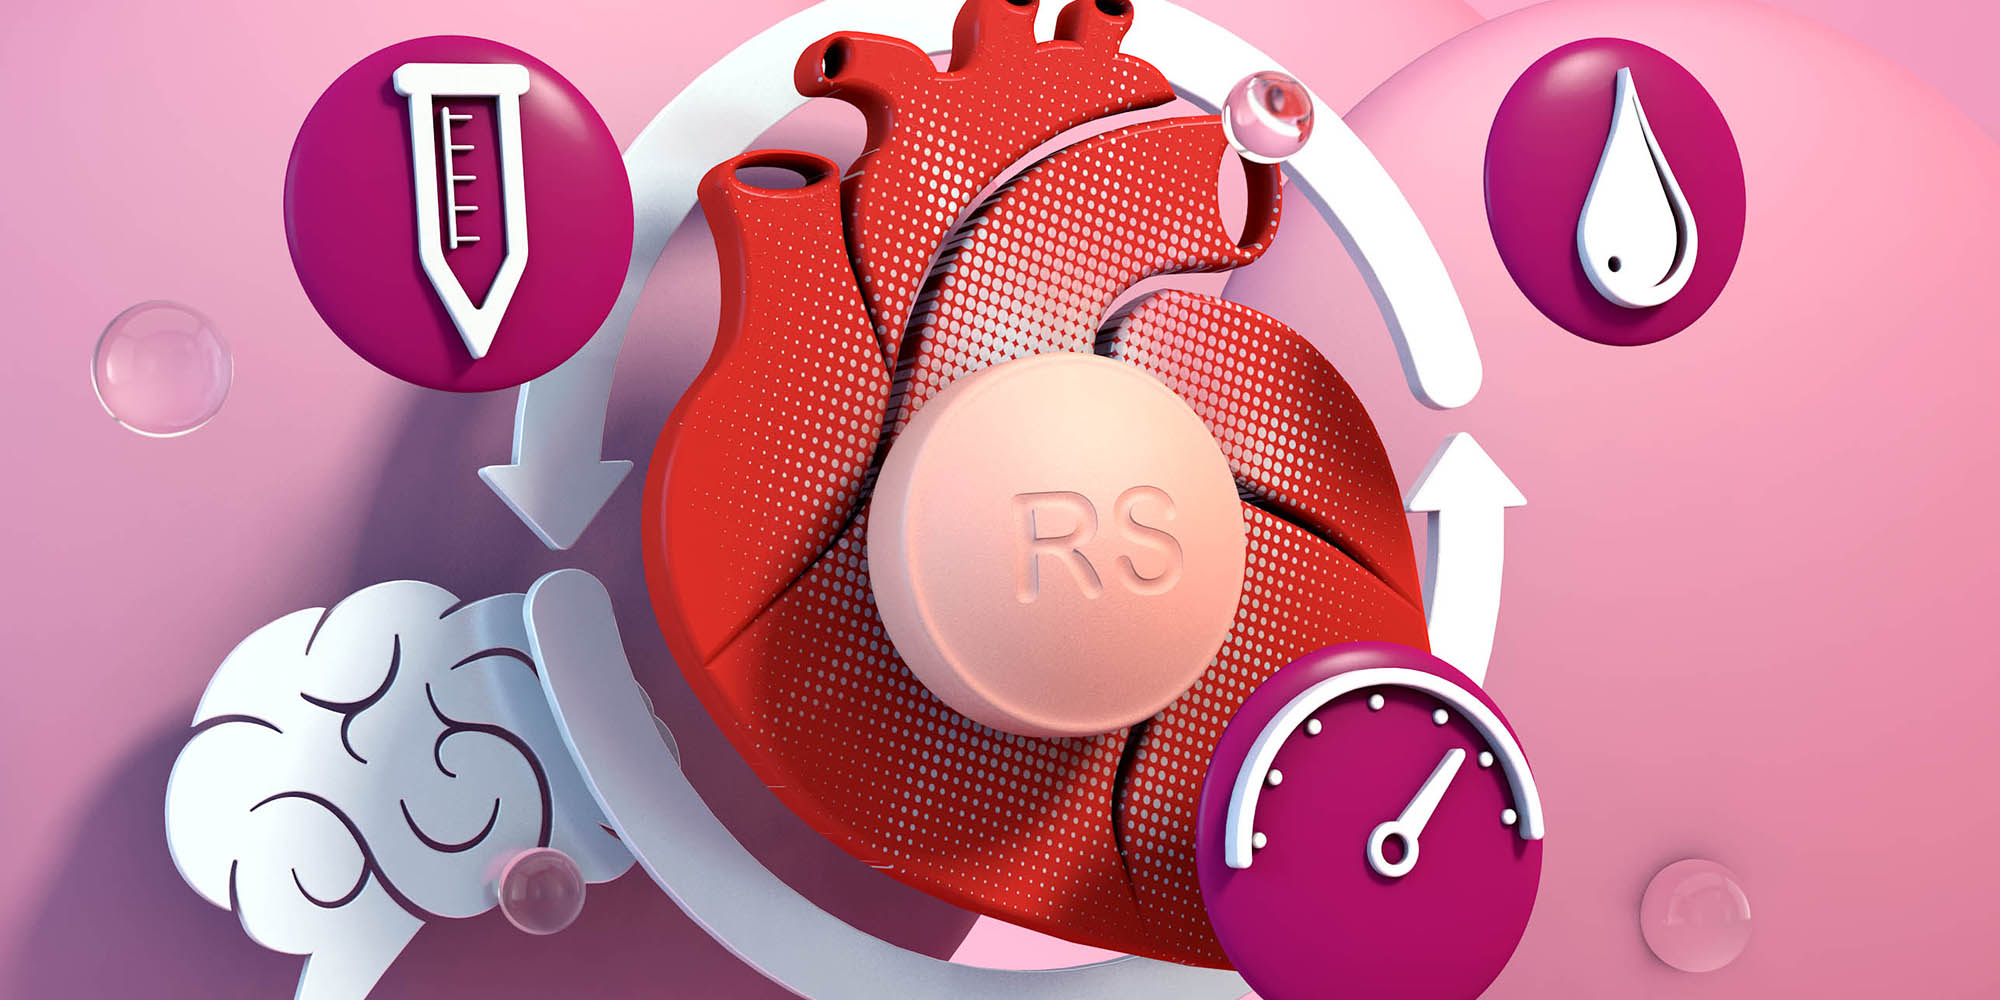 Rosuvastatin: another option to lower cardiovascular disease risk